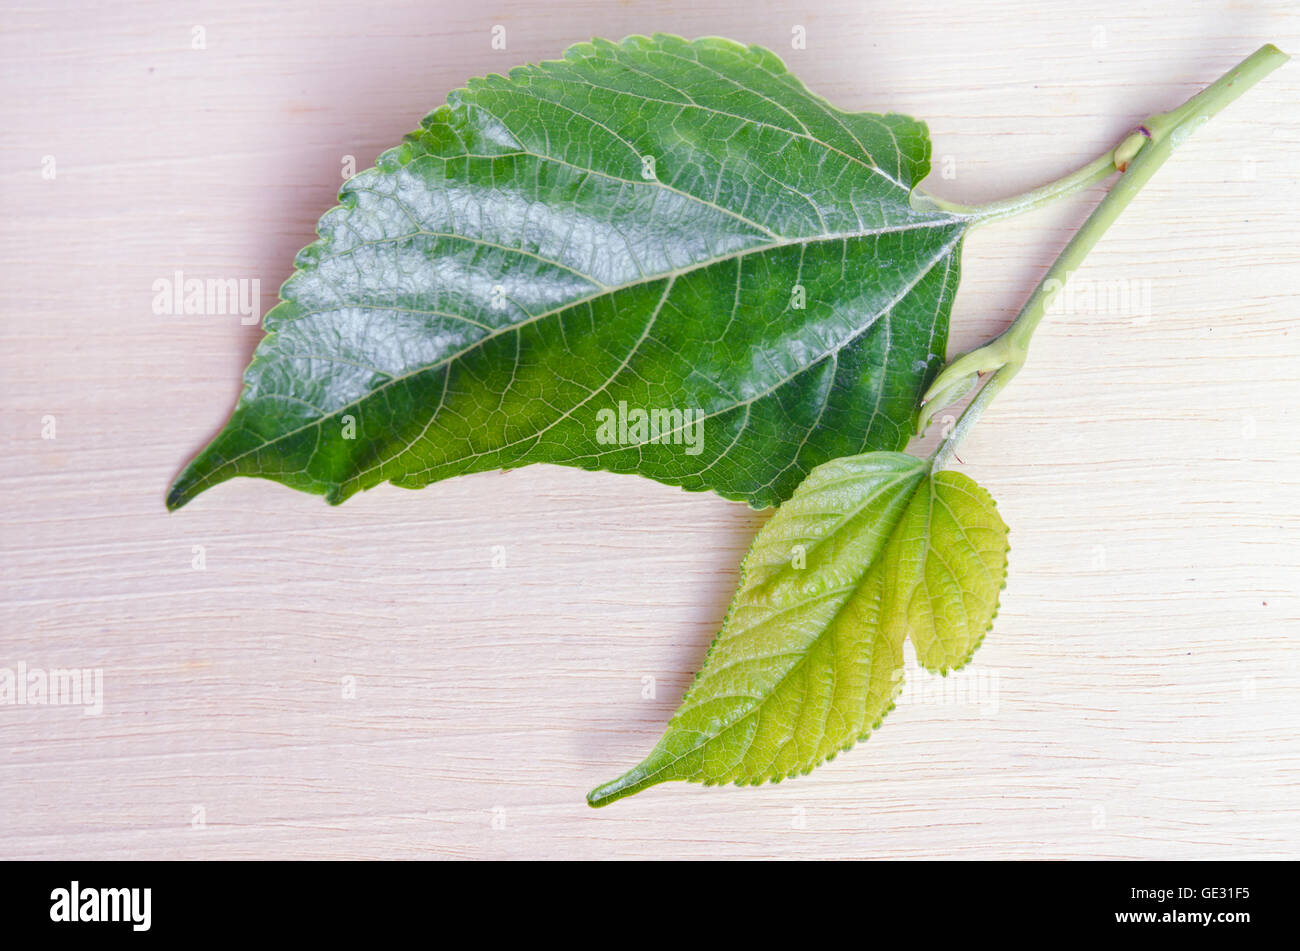 Mulberry (Other names are MORUS ALBA, Moraceae, mulberry, white mulberry, Chinese mulberry, Morus cathayana) leaf isolated on wo Stock Photo